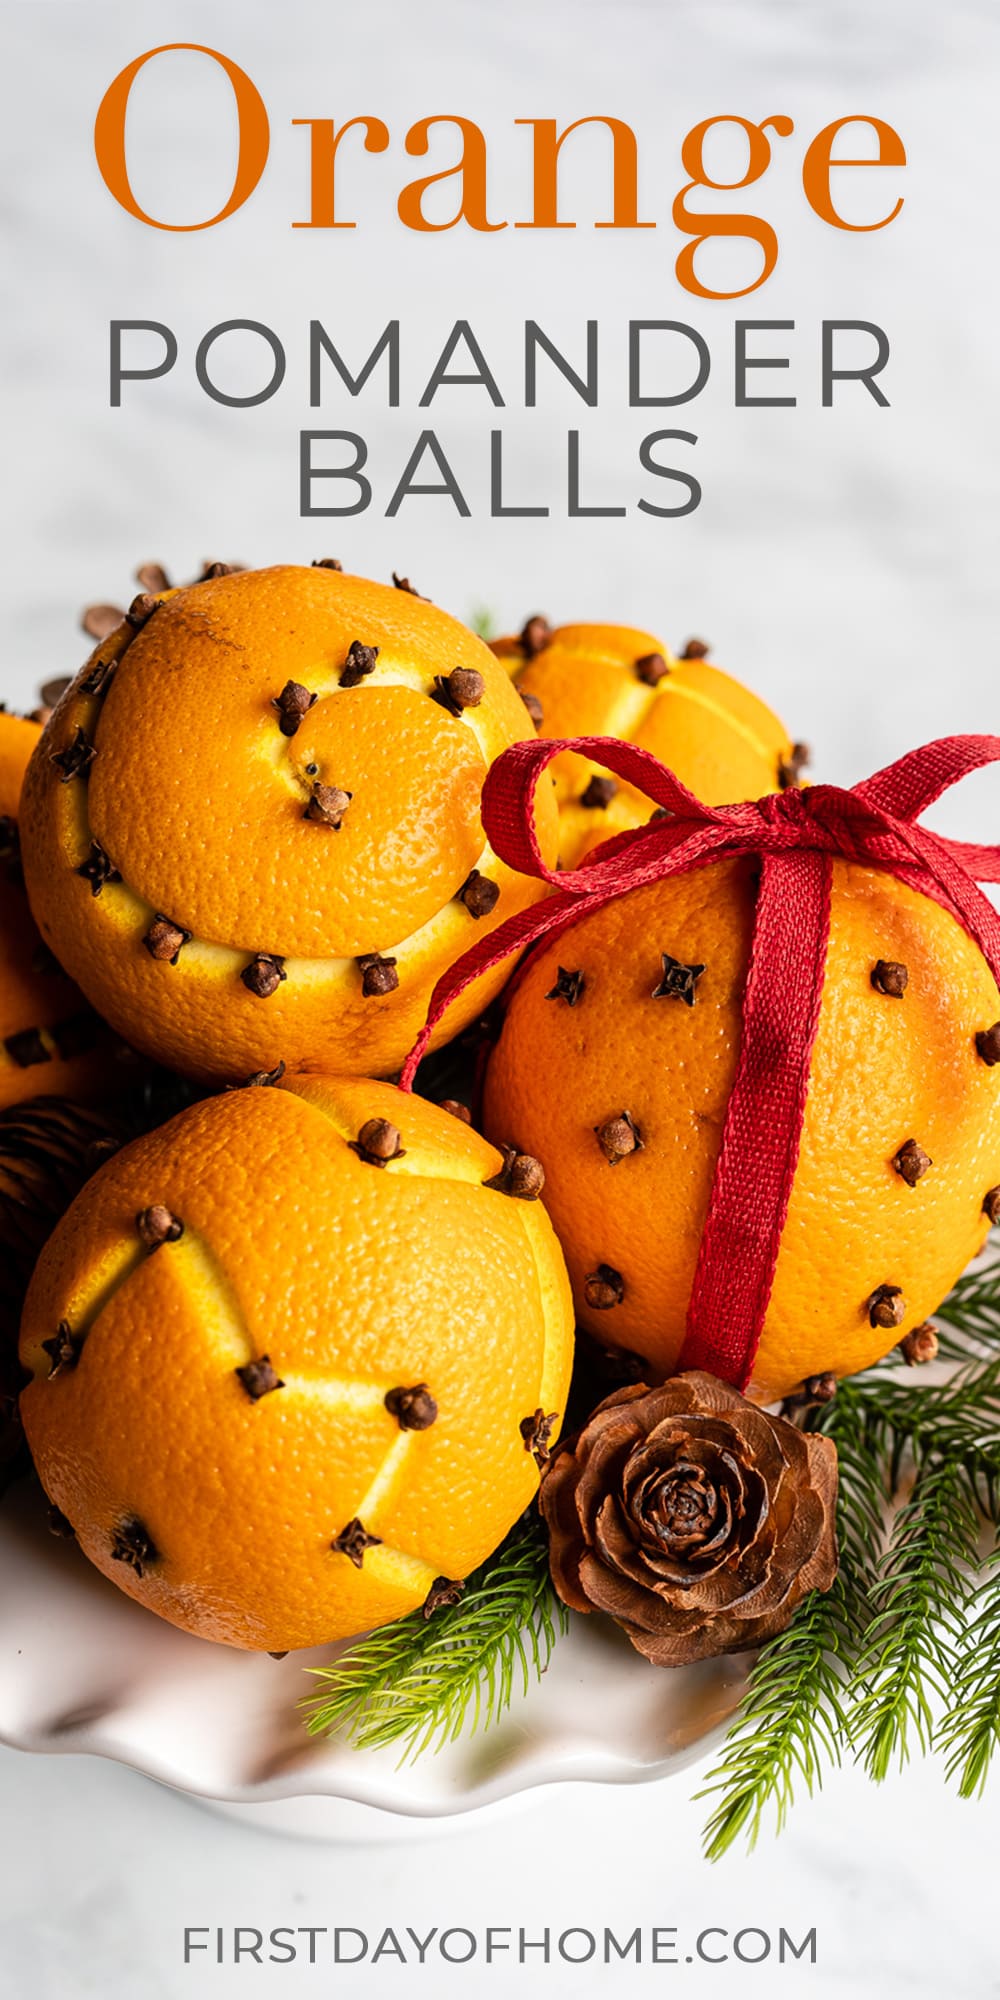 Orange pomander balls with cloves and text overlay reading "Orange Pomander Balls"